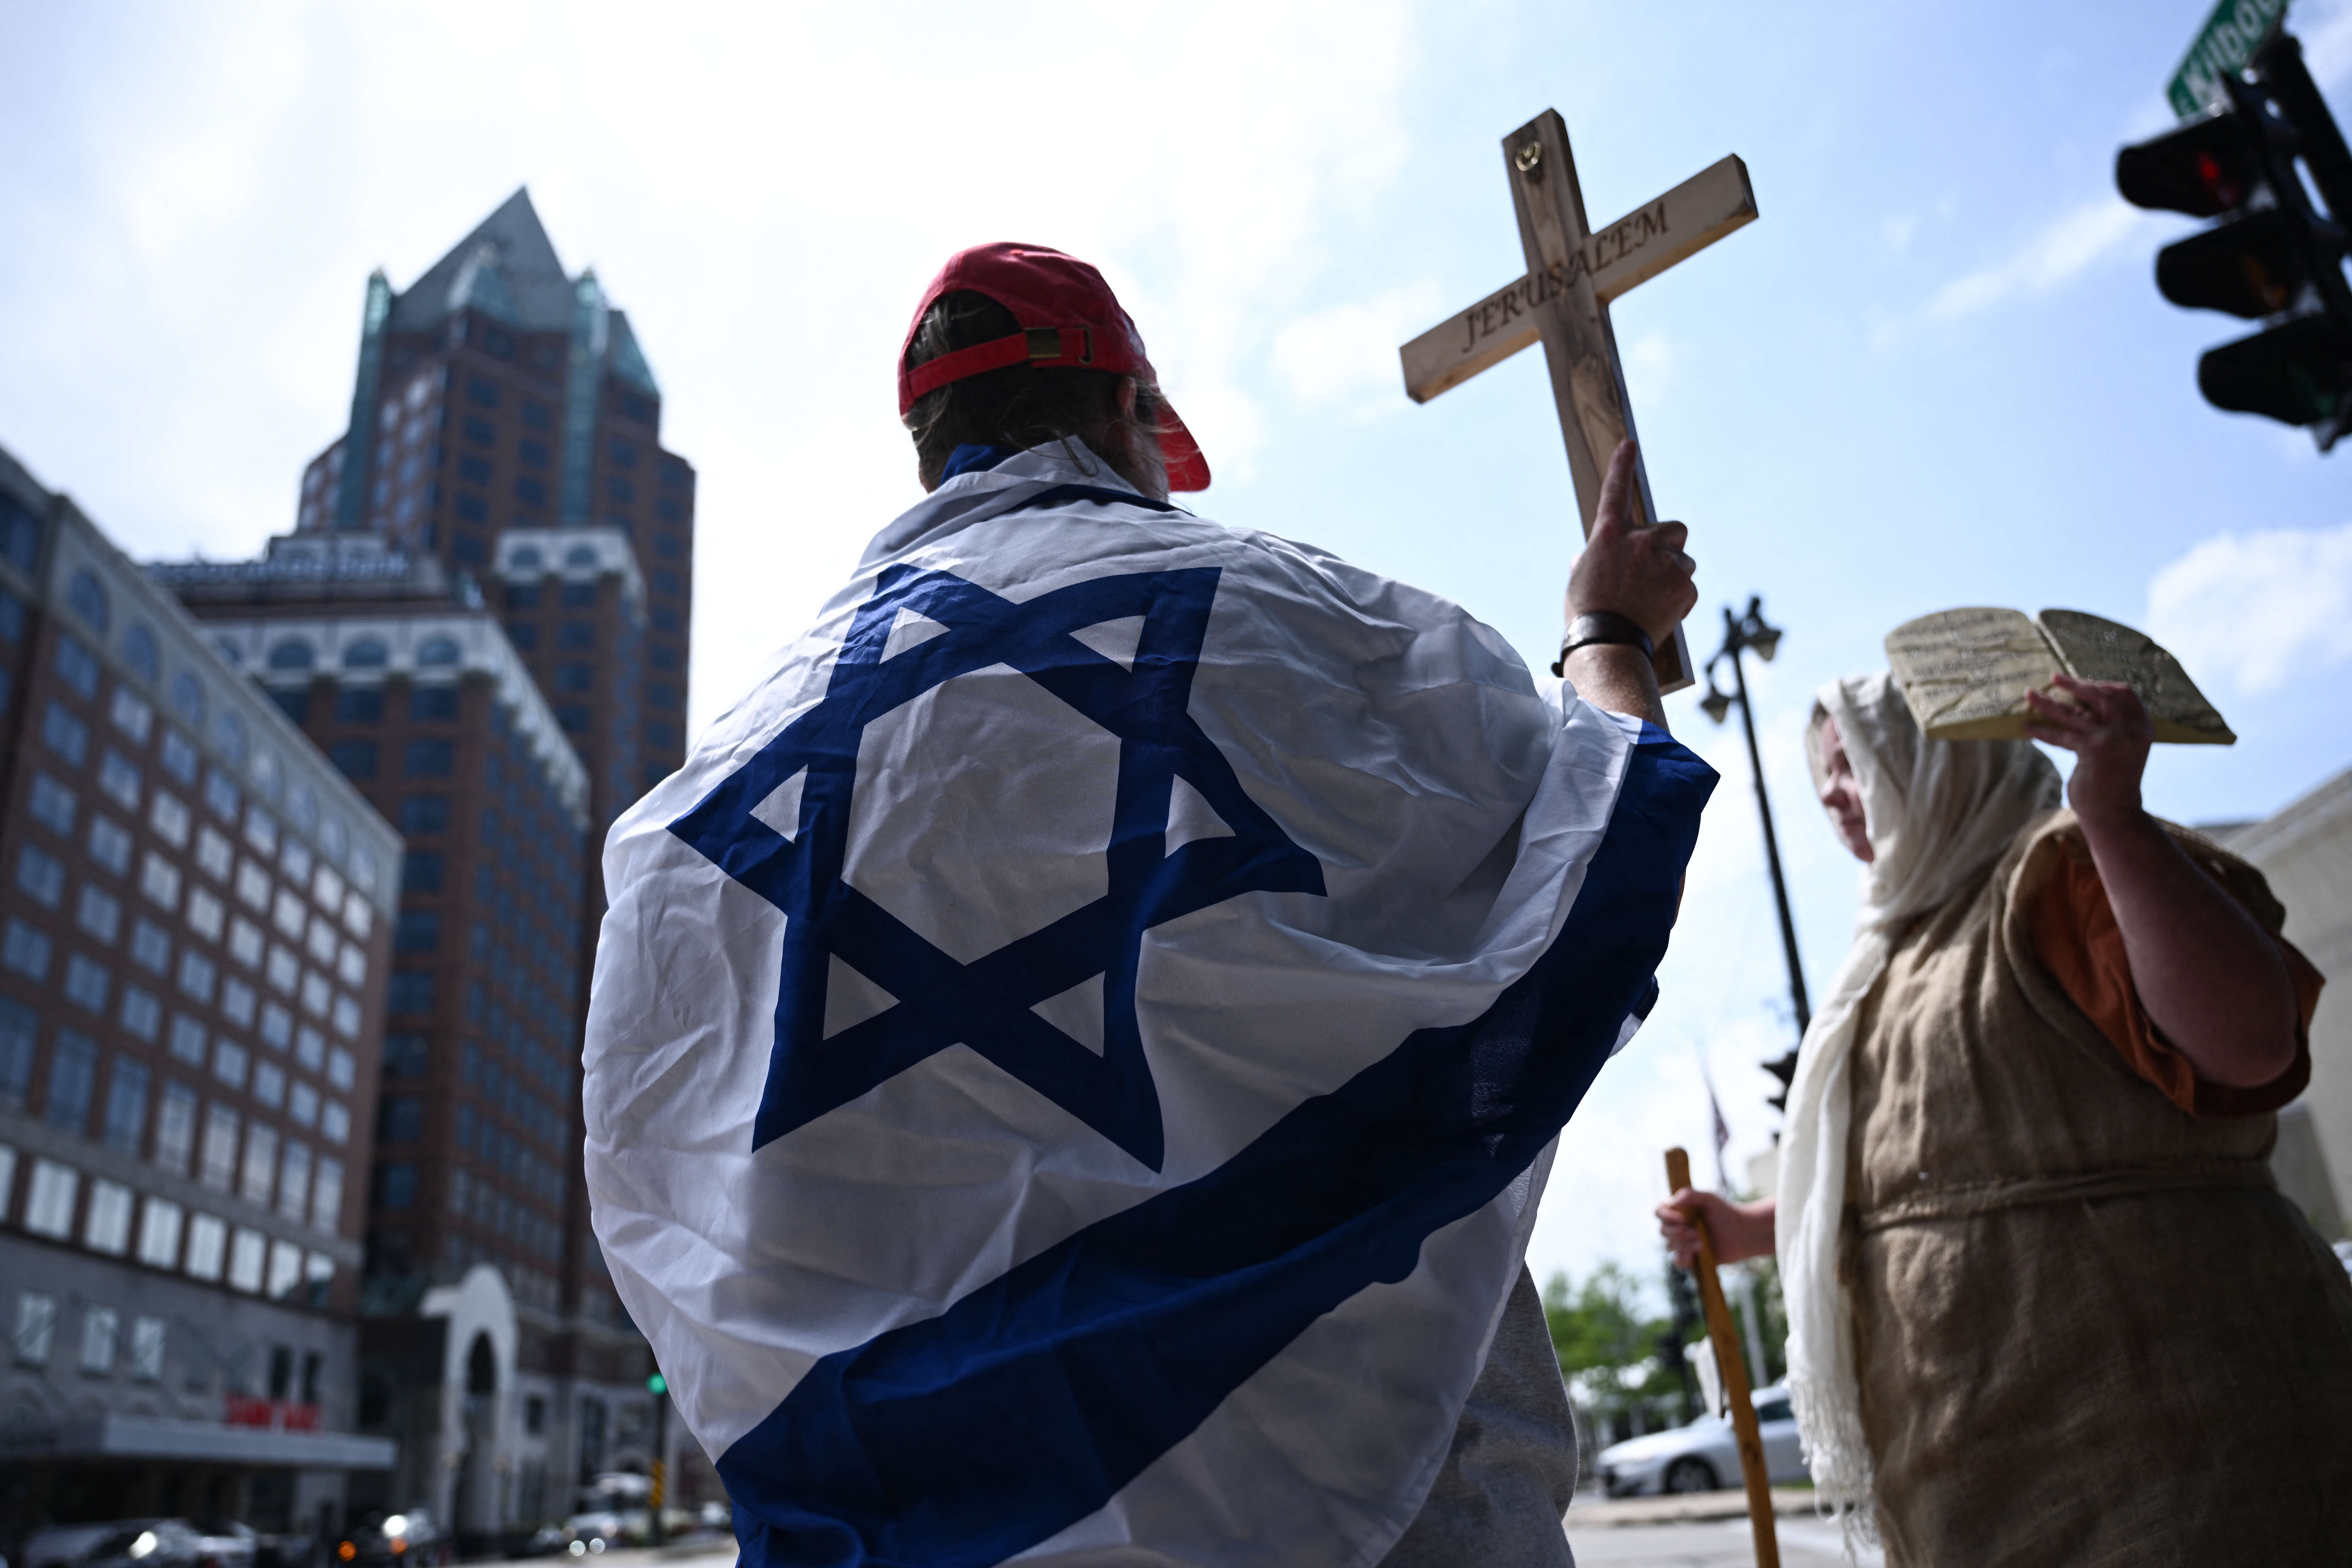 Outside the RNC, a Christian woman wears an Israeli flag while holding a cross.